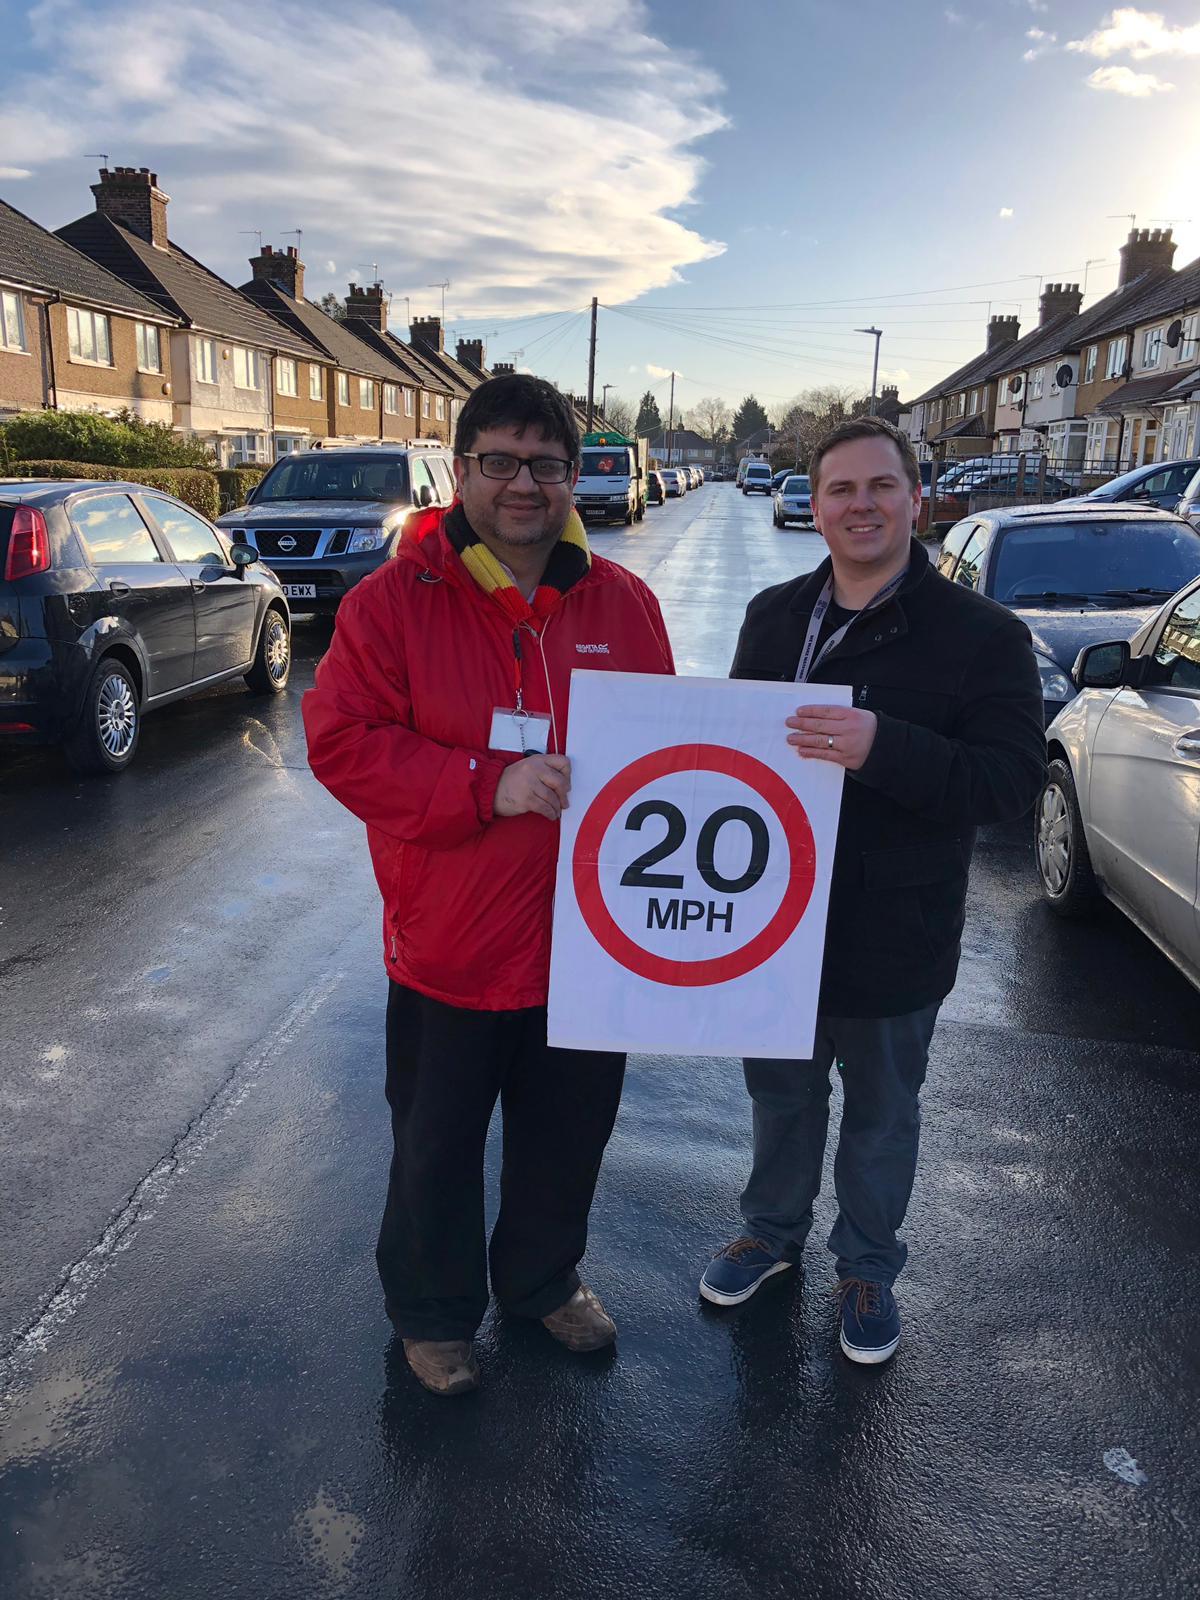 Cllr Asif Khan and Cllr Richard Smith pictured in 2019 as part of their campaign for a new 20mph zone in North Watford